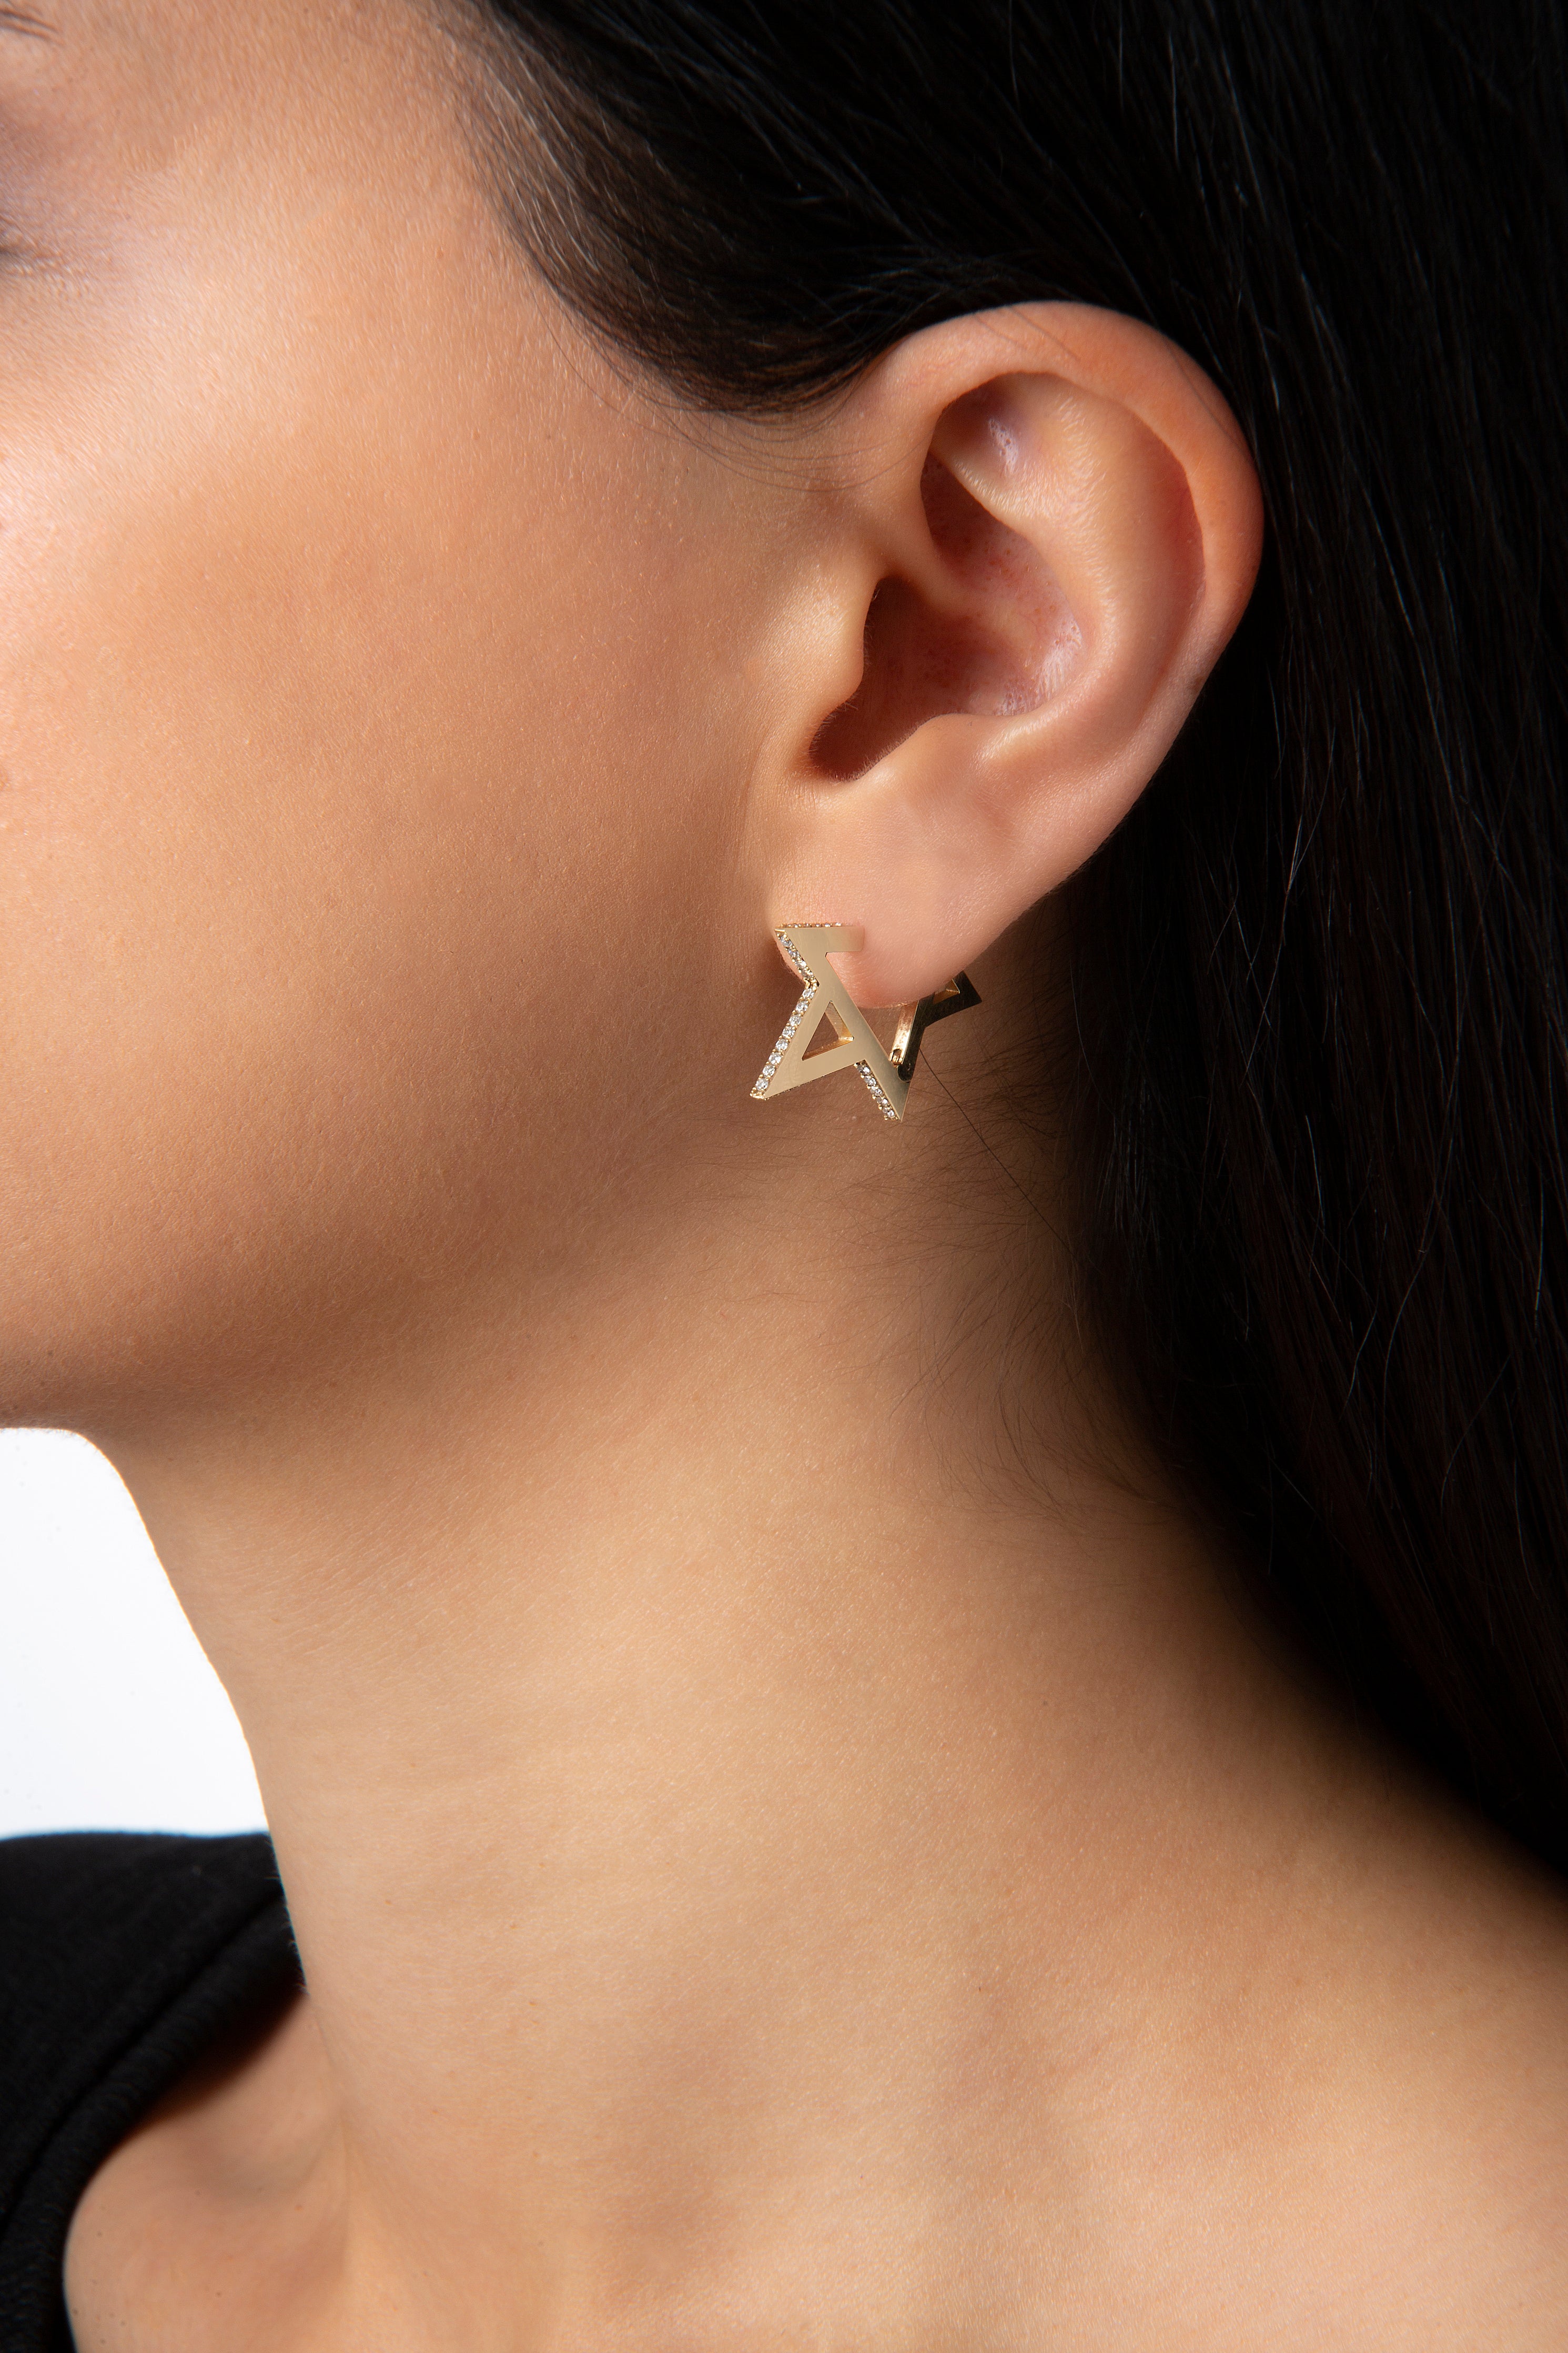 Star Earring in Yellow Gold - Her Story Shop